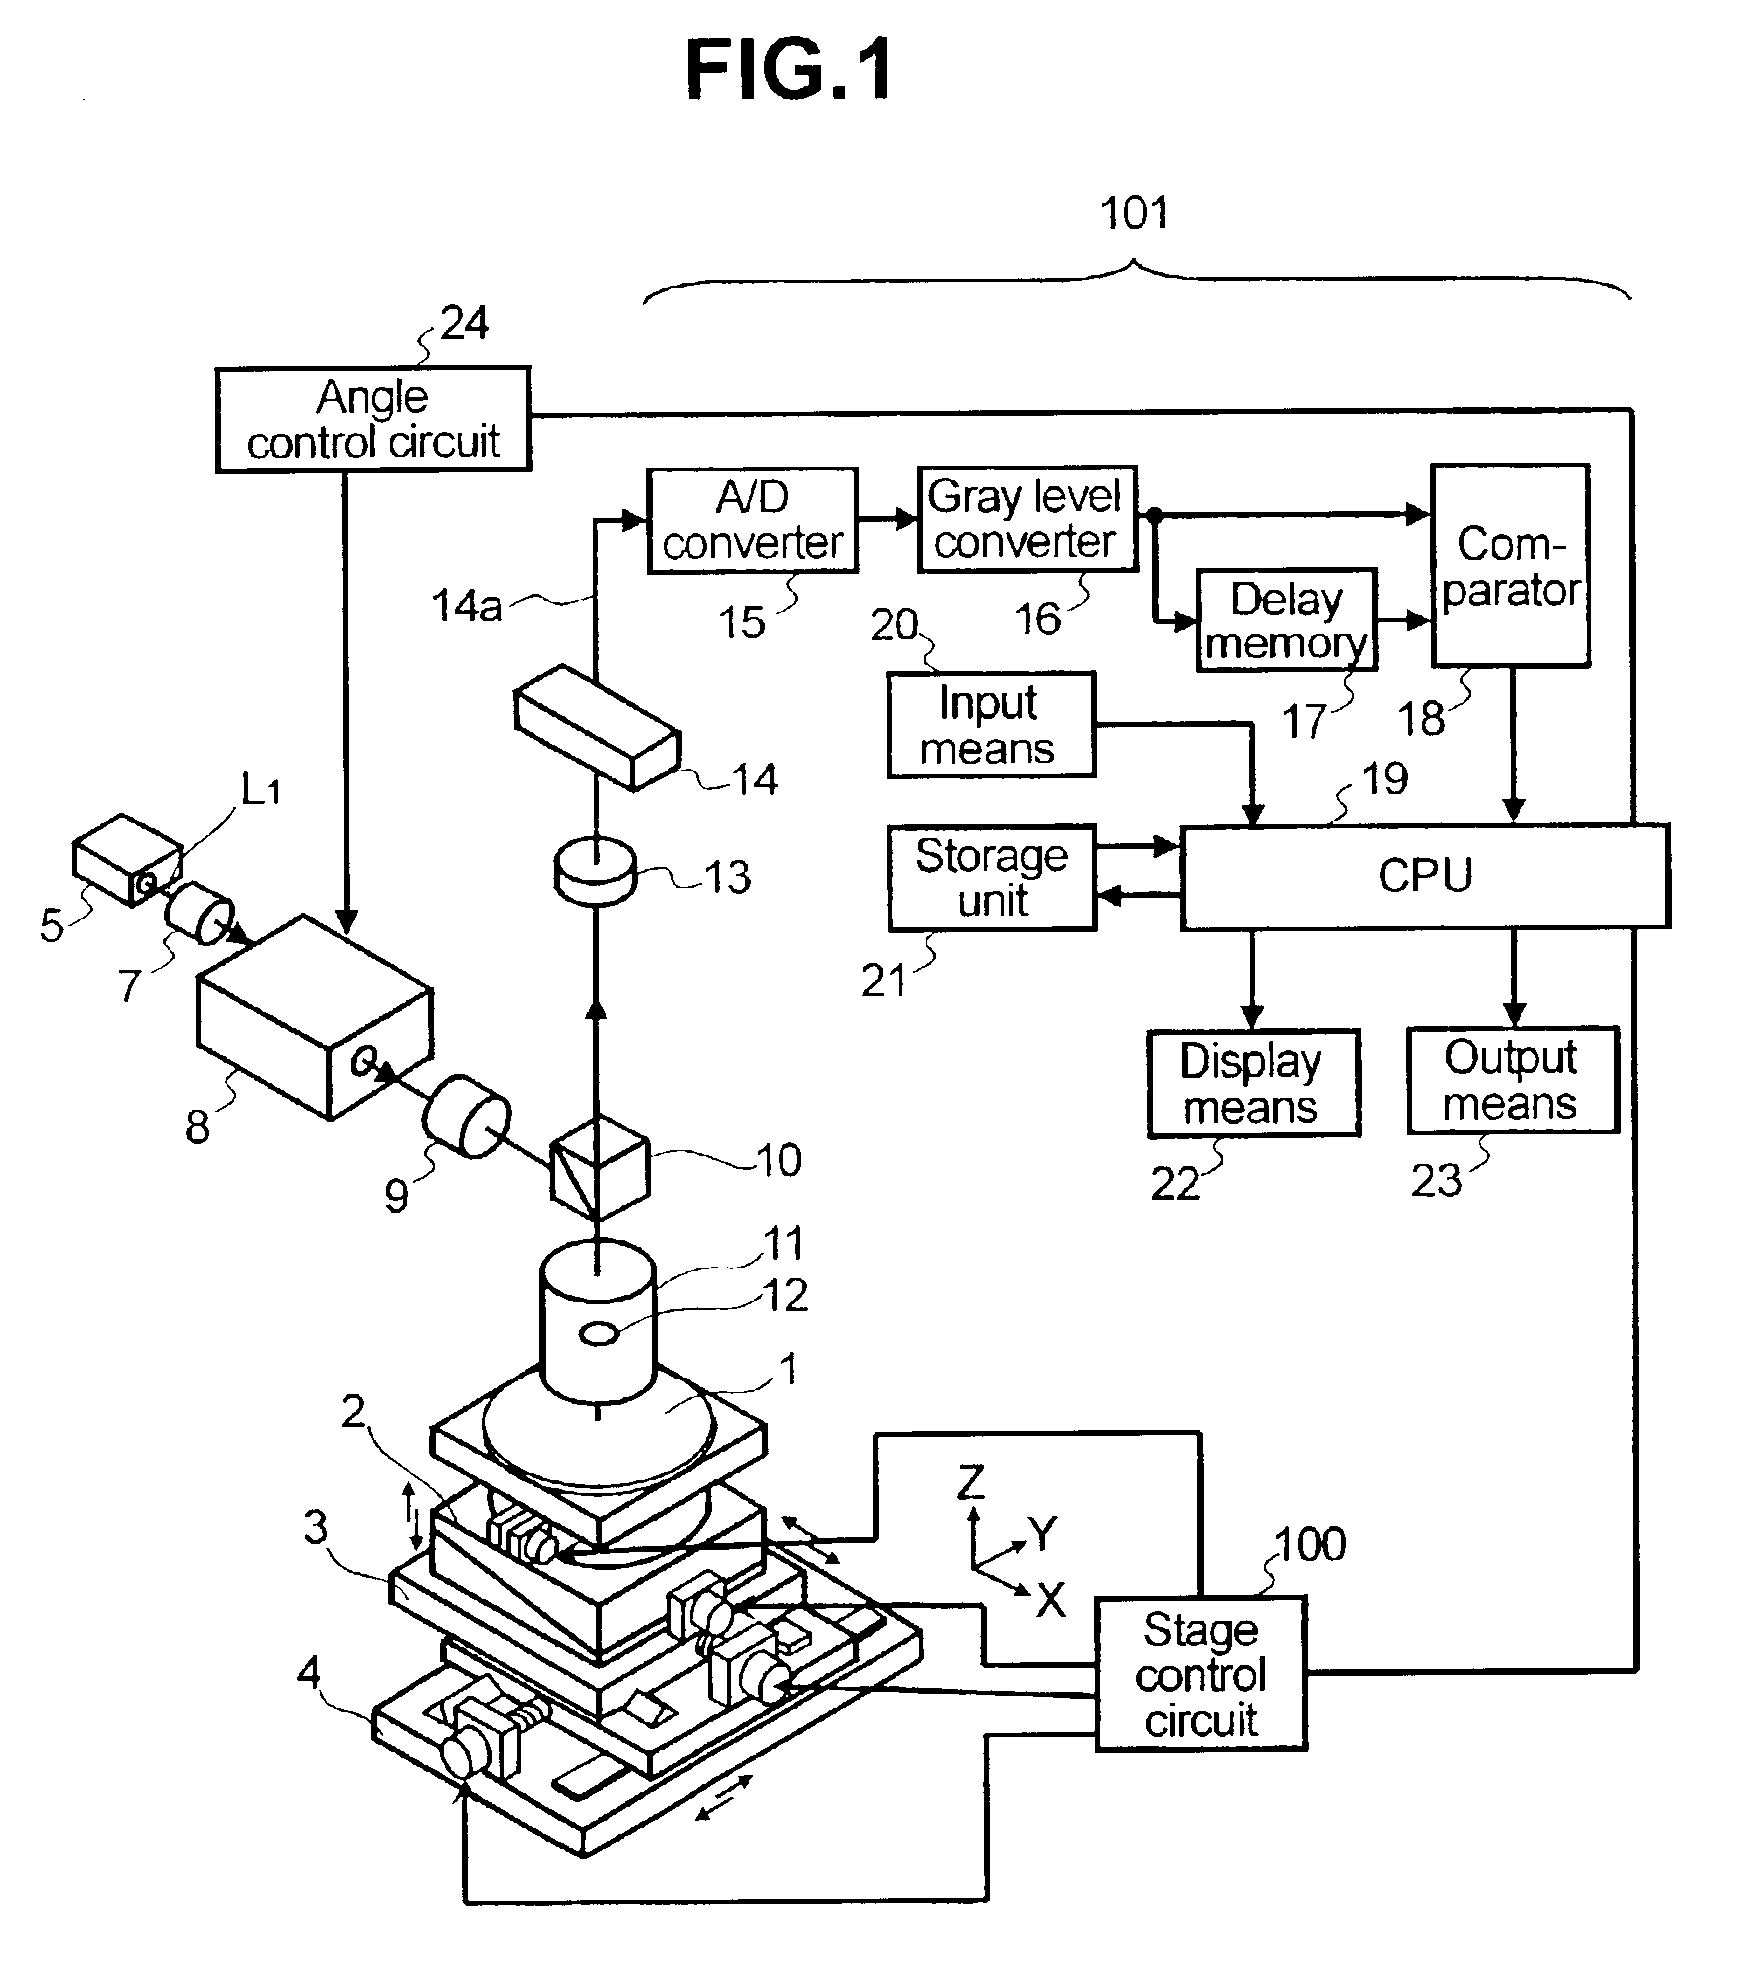 Method and apparatus for detecting pattern defects